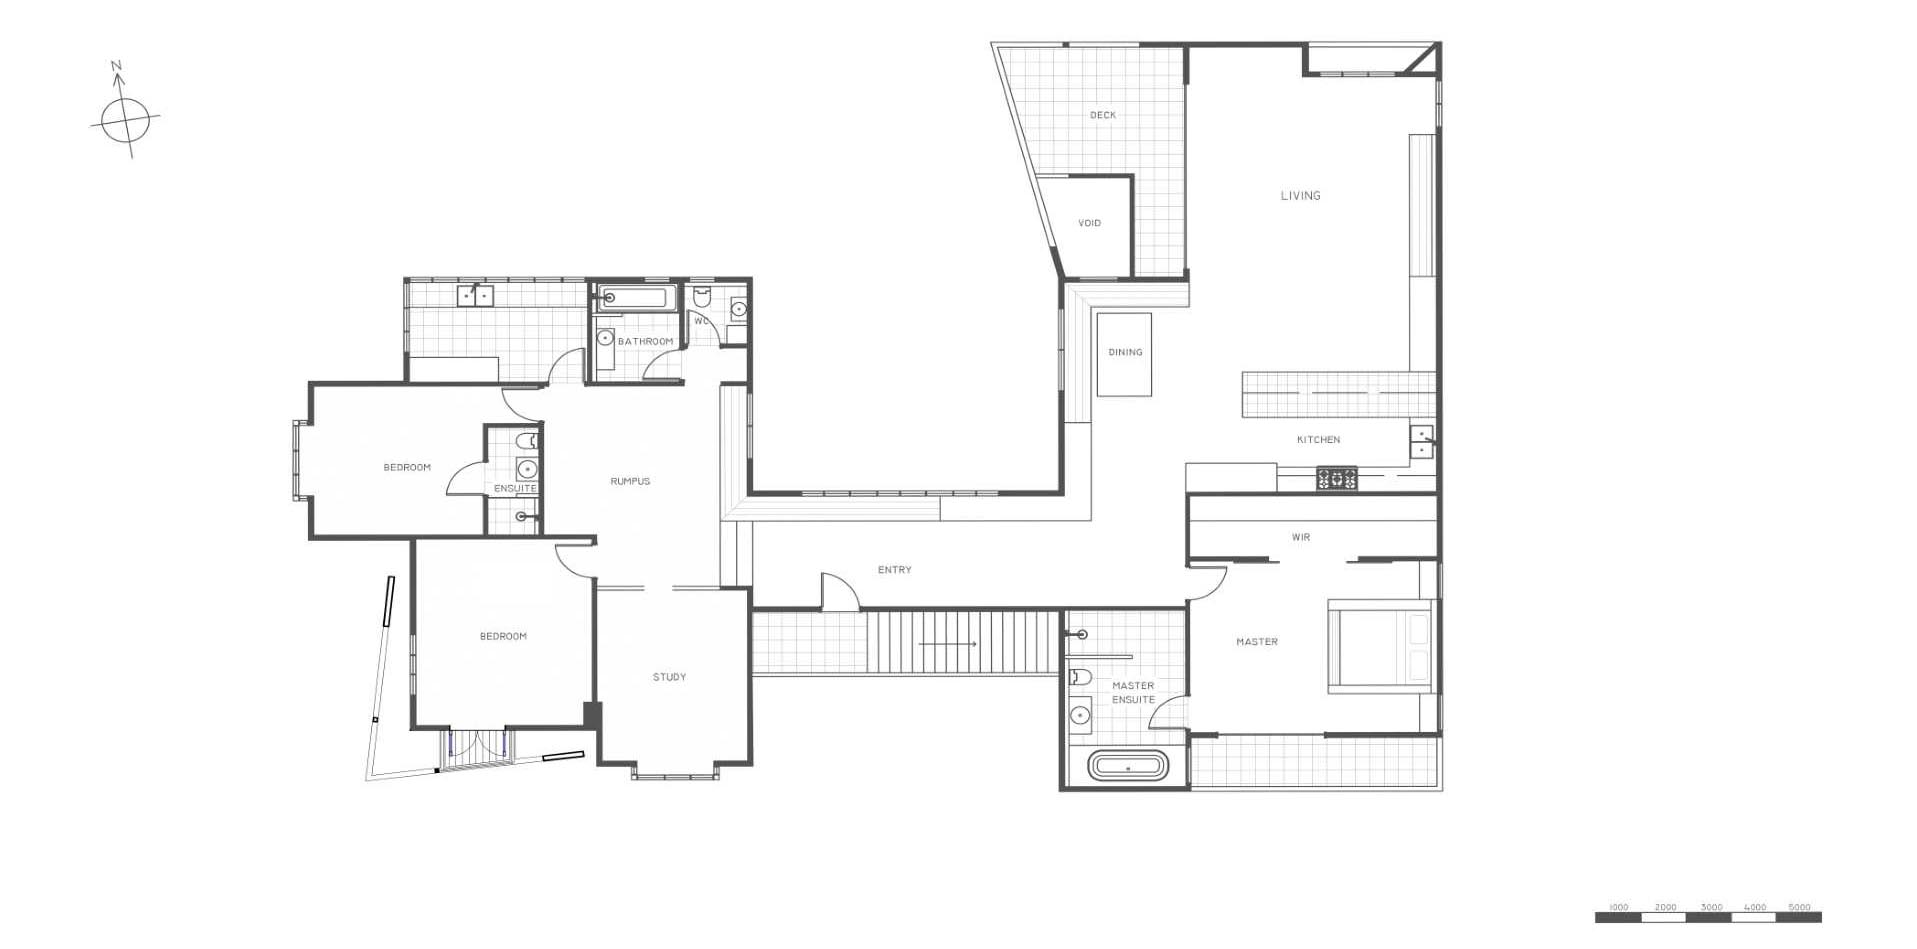 This house floor plan shows the separation of the main social areas of the house with the primary bedroom and bathroom, and the kids zone.